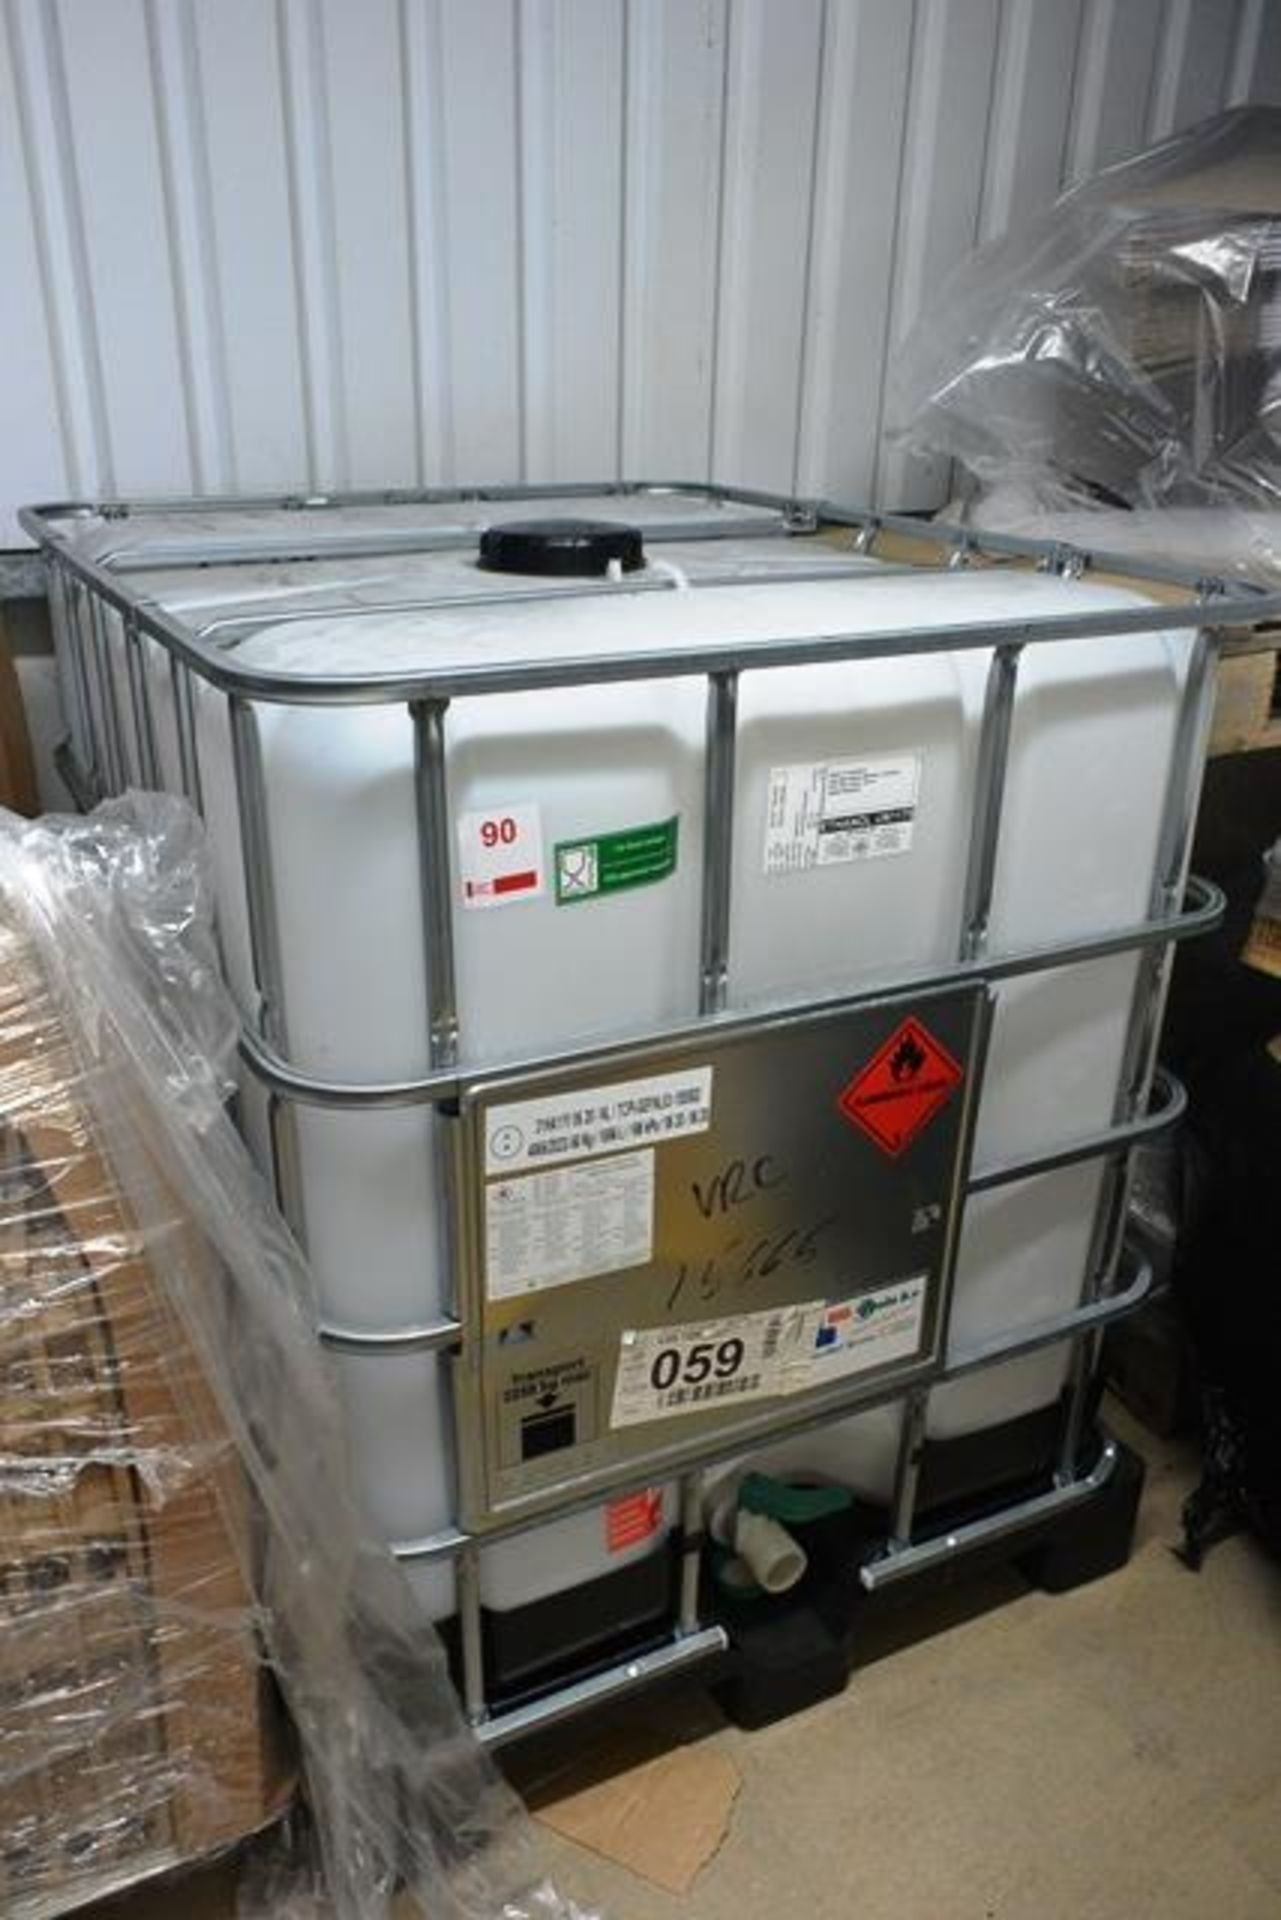 Circa 1000L IBC storage vessel . This Lot is Located: Black Tor Brewery, Units 5 & 6, Gidleys